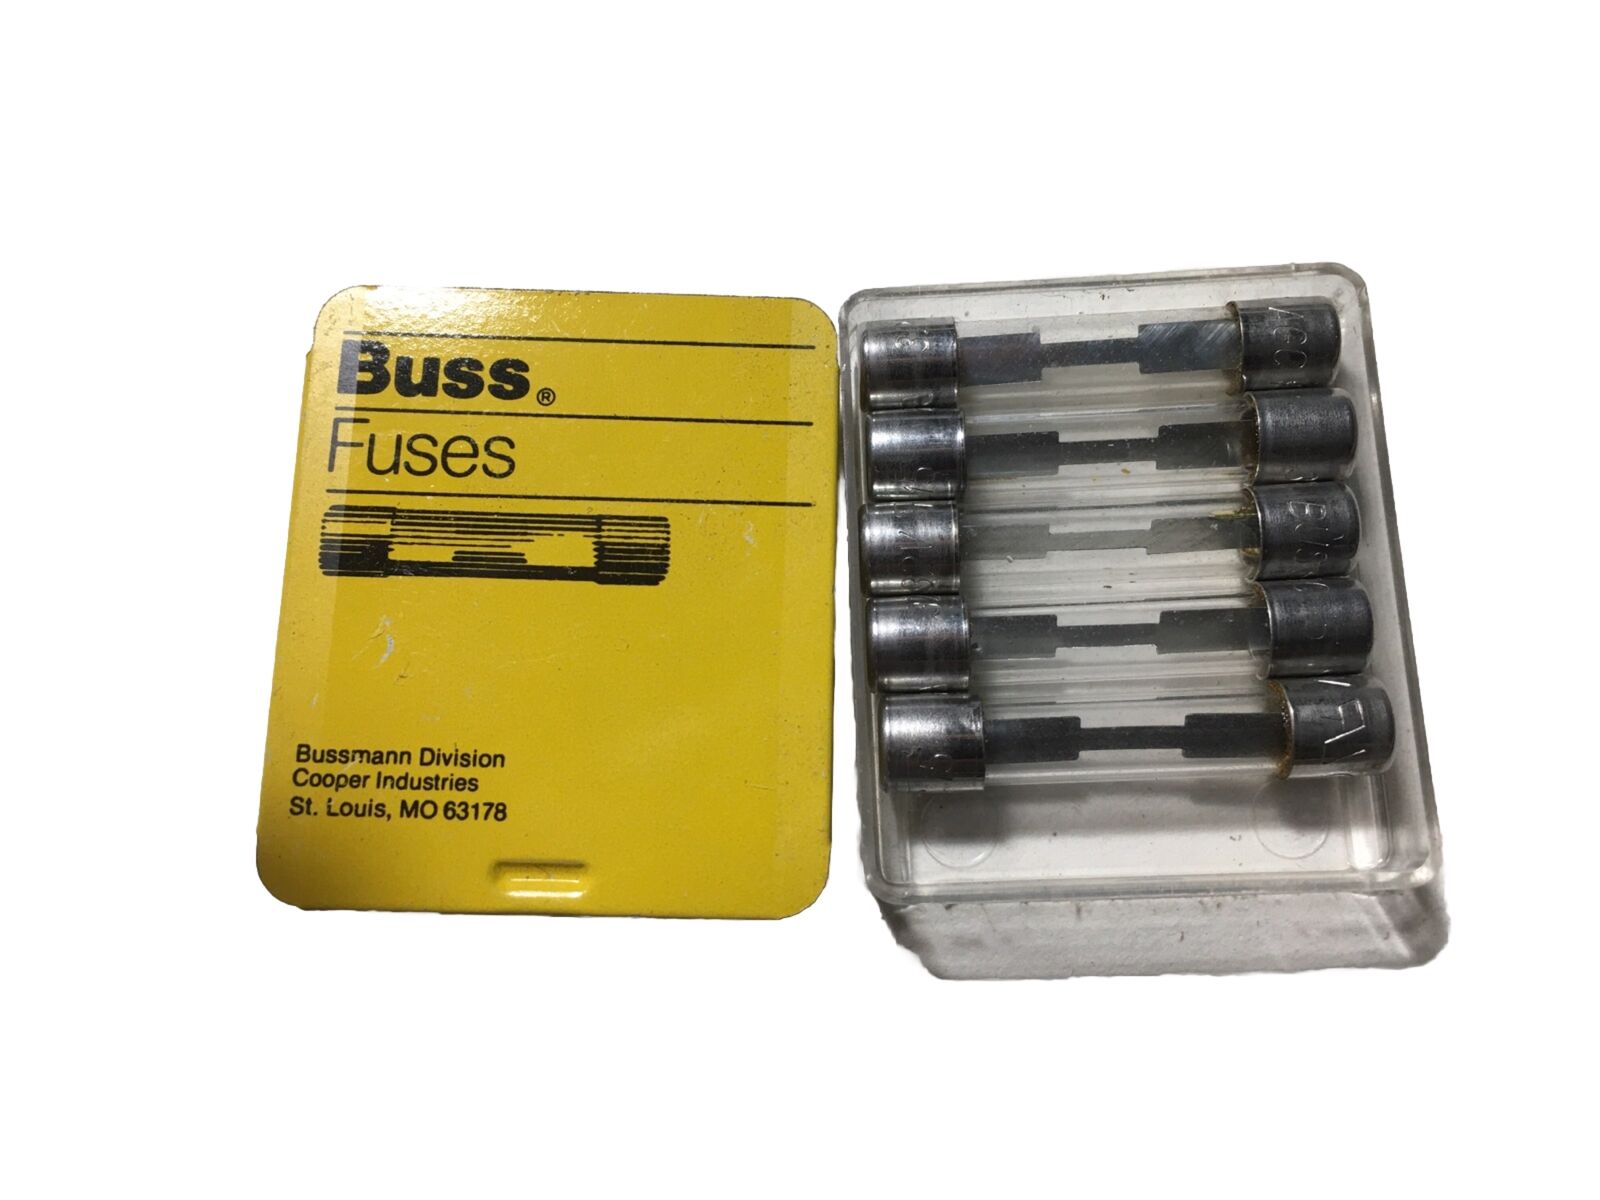 [5] BUSS AGC 15 FAST ACTING GLASS FUSE USA MADE [5 PCS]